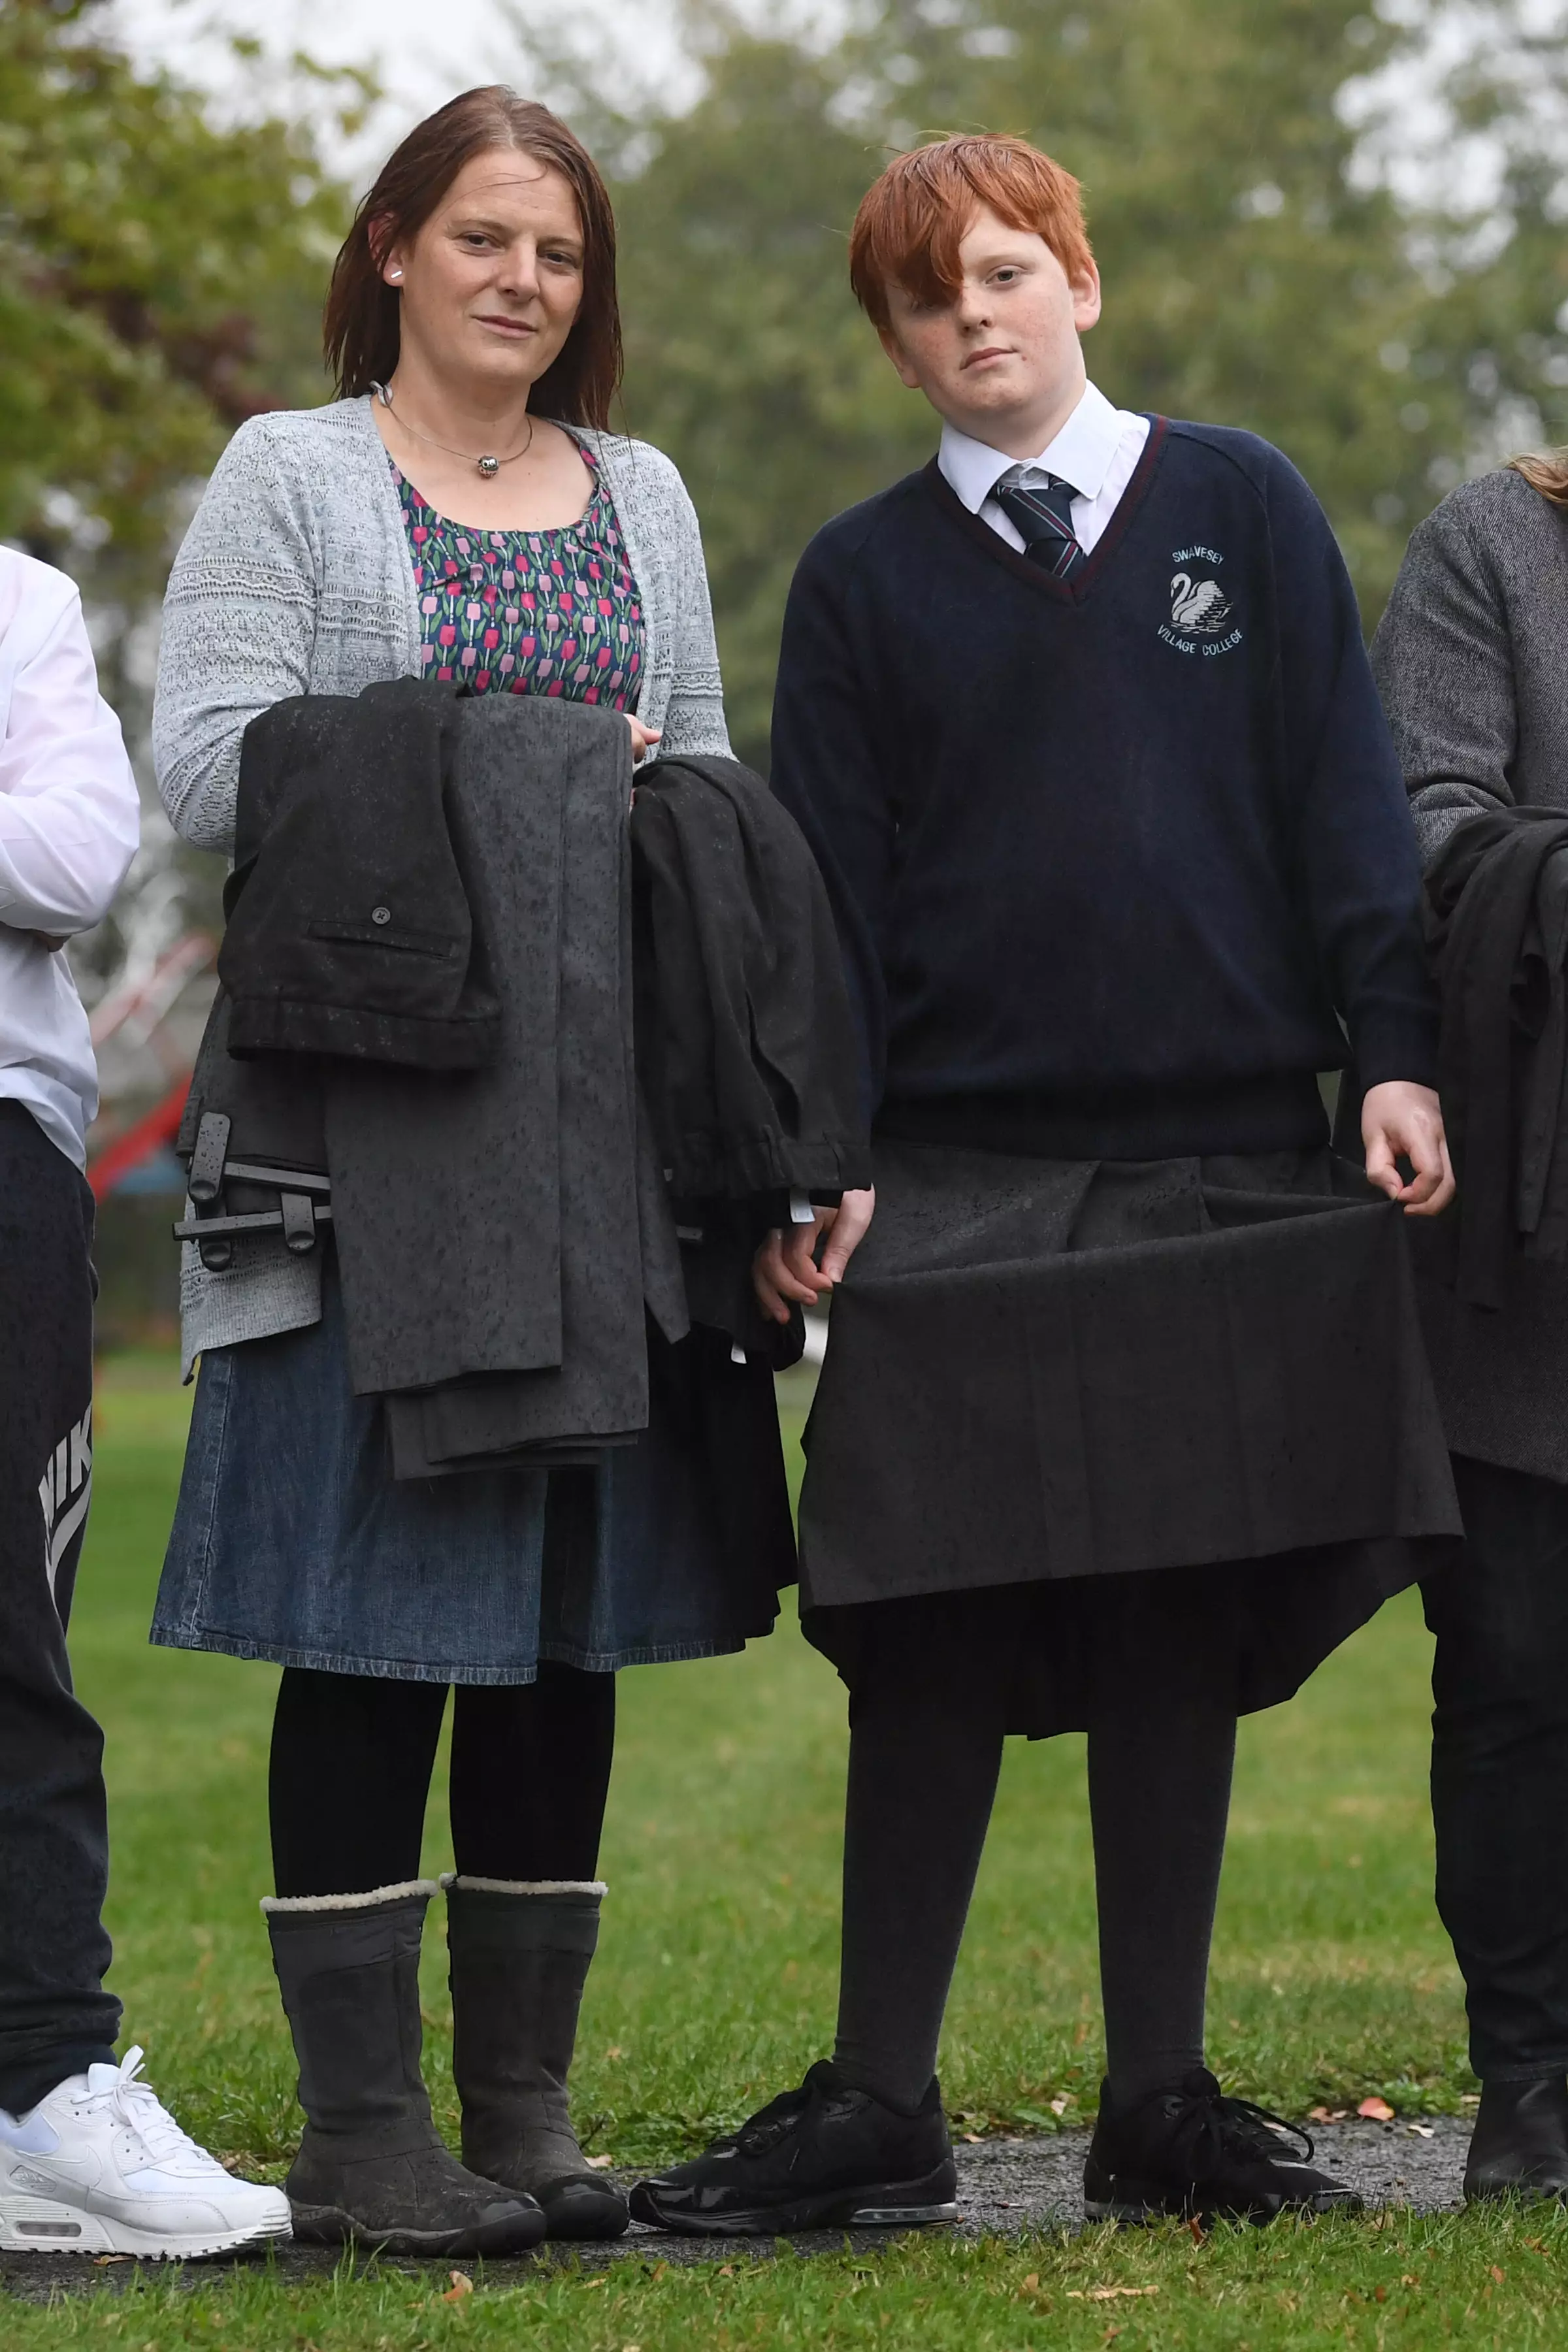 Josh Mayer has been to school in a skirt after being taken out of lessons for wearing the wrong type of trousers.